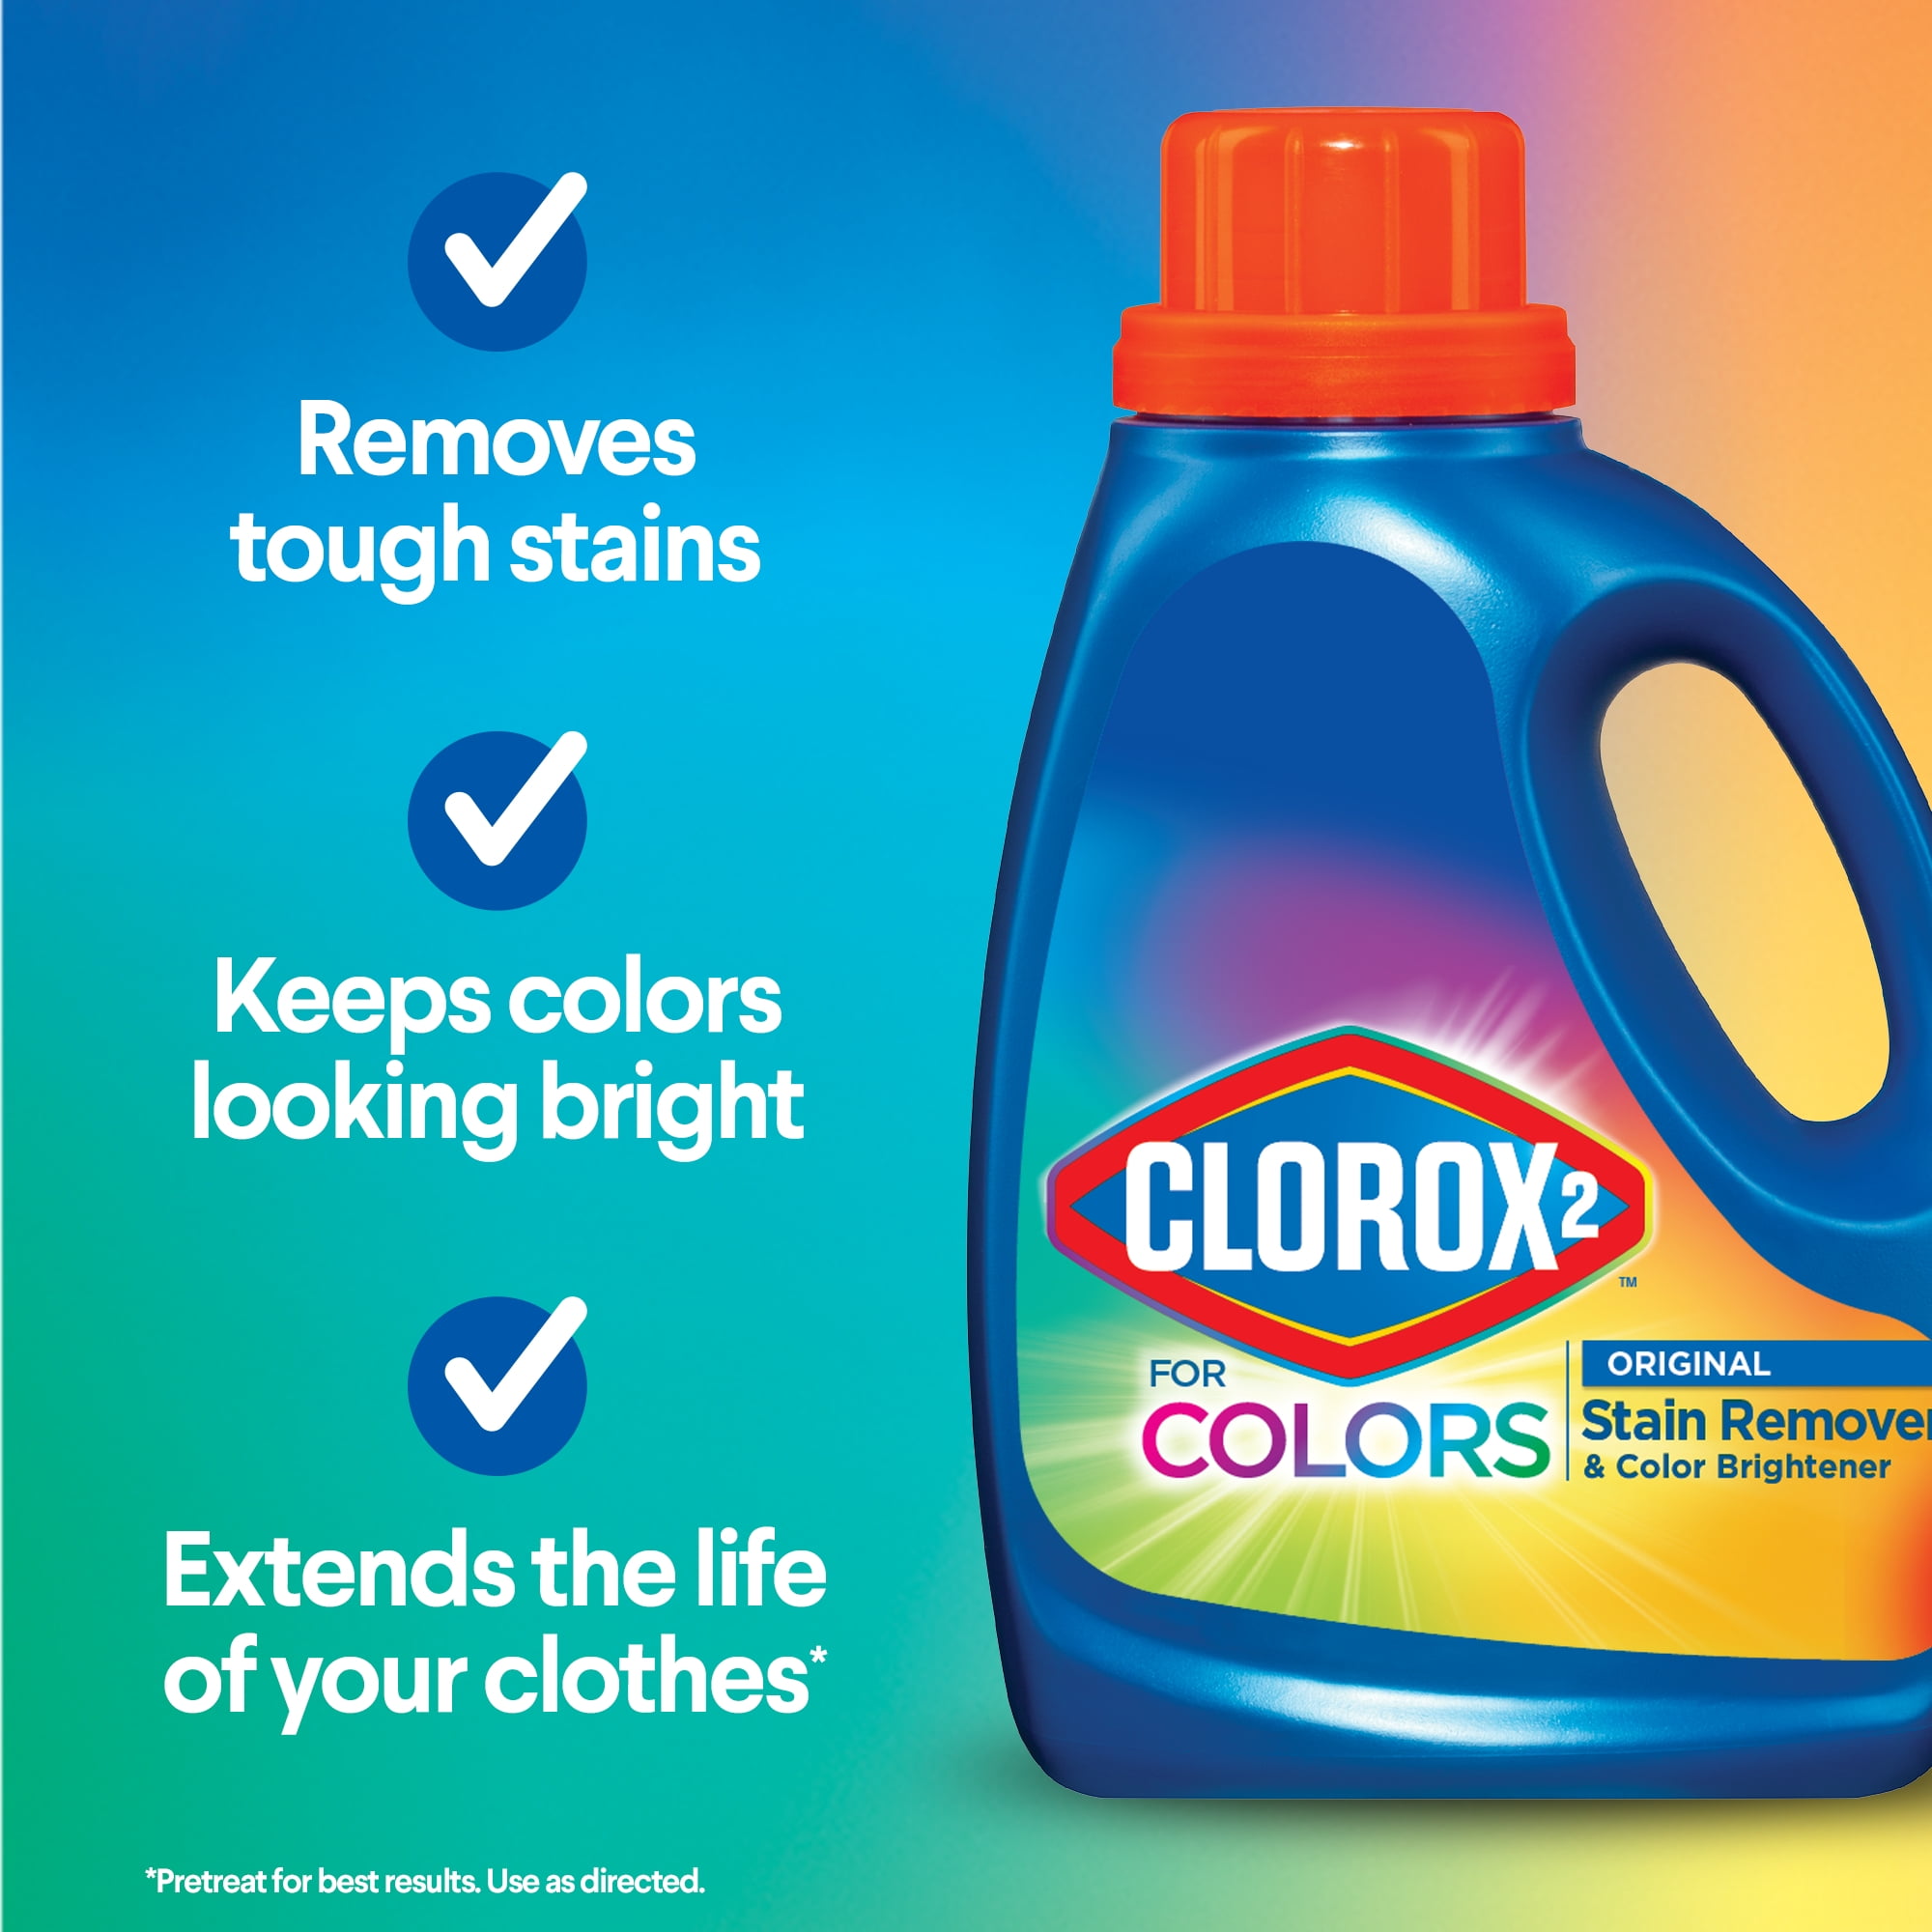 Chan Shops Deals on Instagram: DG clearance event- CLOROX laundry odor and  stain remover ONLY $2.35 or less PAY ONLY $2.70 or less for 2. **pay less  at stores that are an